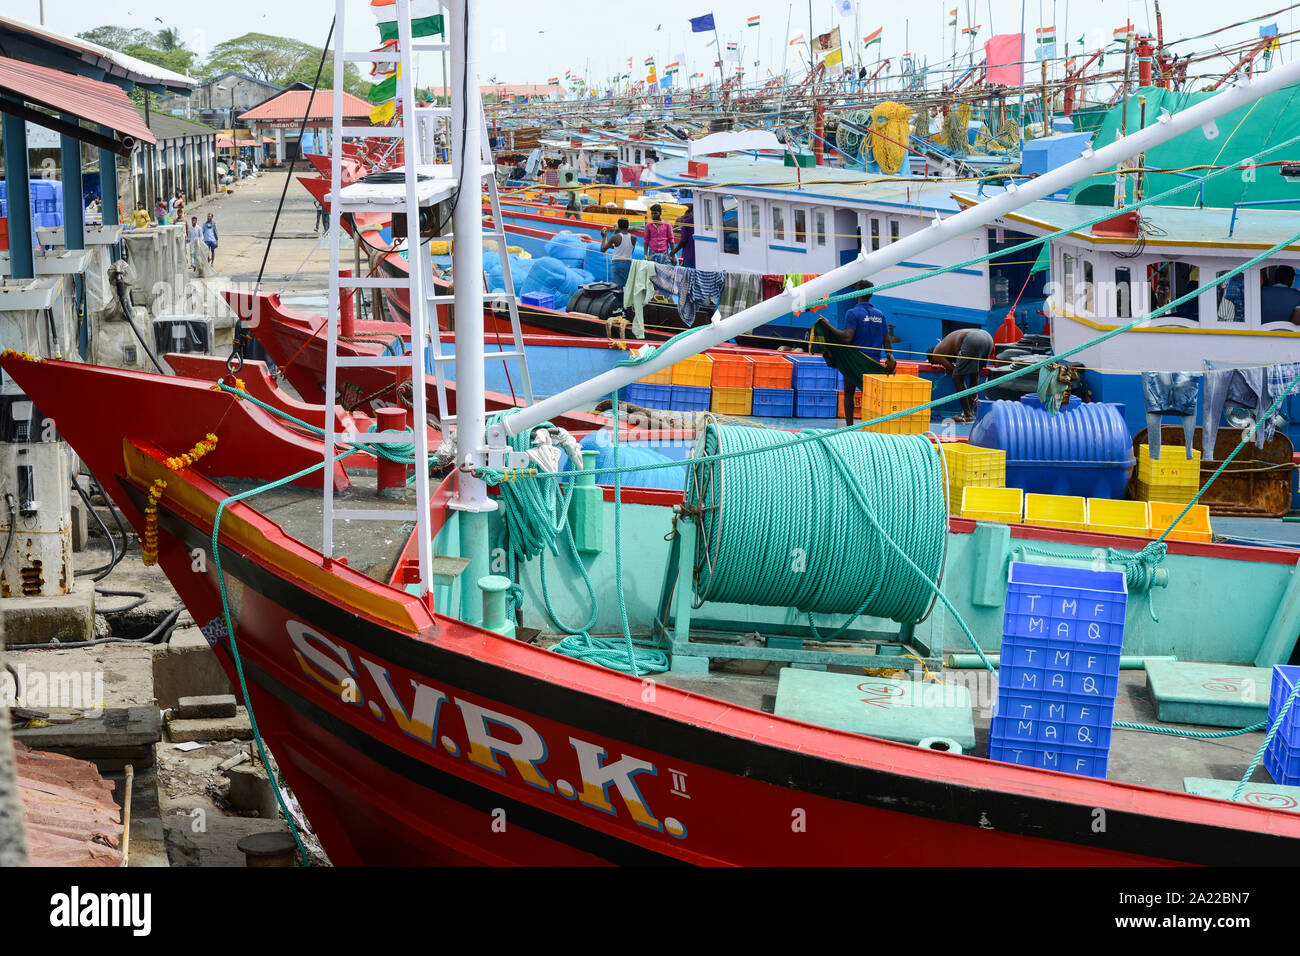 INDIA, Karnataka, Mangaluru, former name Mangalore, trawler in fishing port during monsoon, plastic fishing trawl nets and ropes which are a major source of plastic pollution of the oceans and dangerous for sea animals Stock Photo